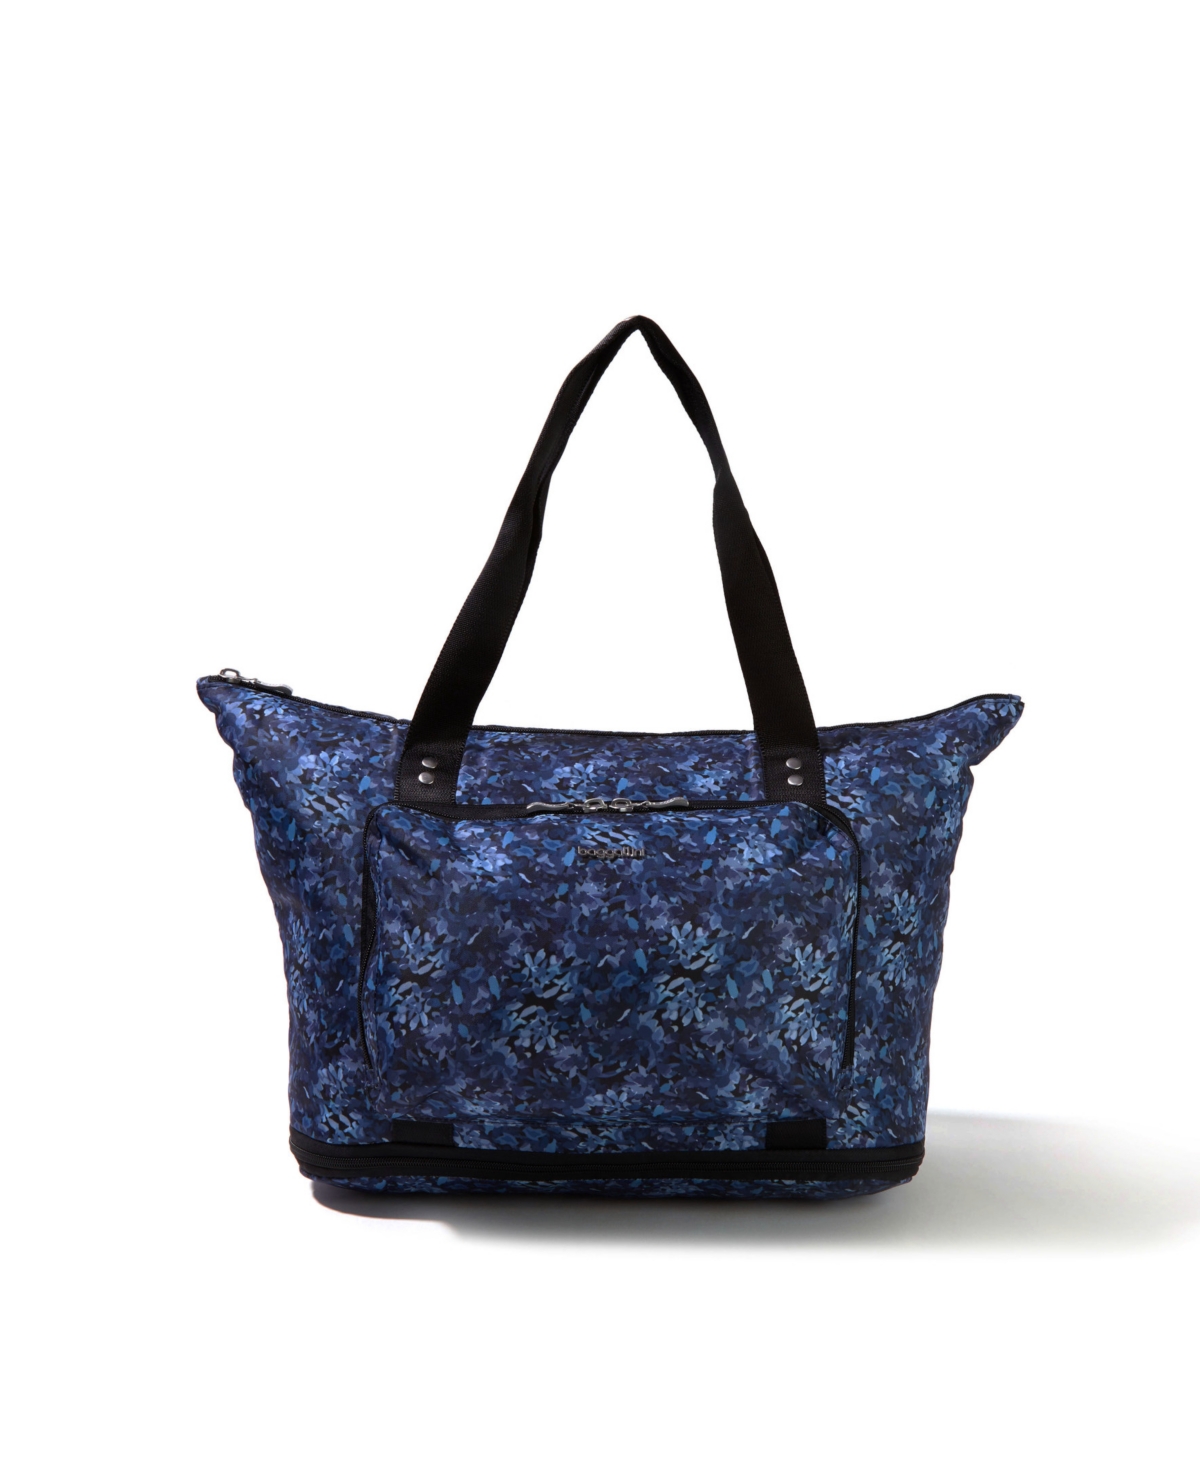 Carryall Packable Tote - Mulberry